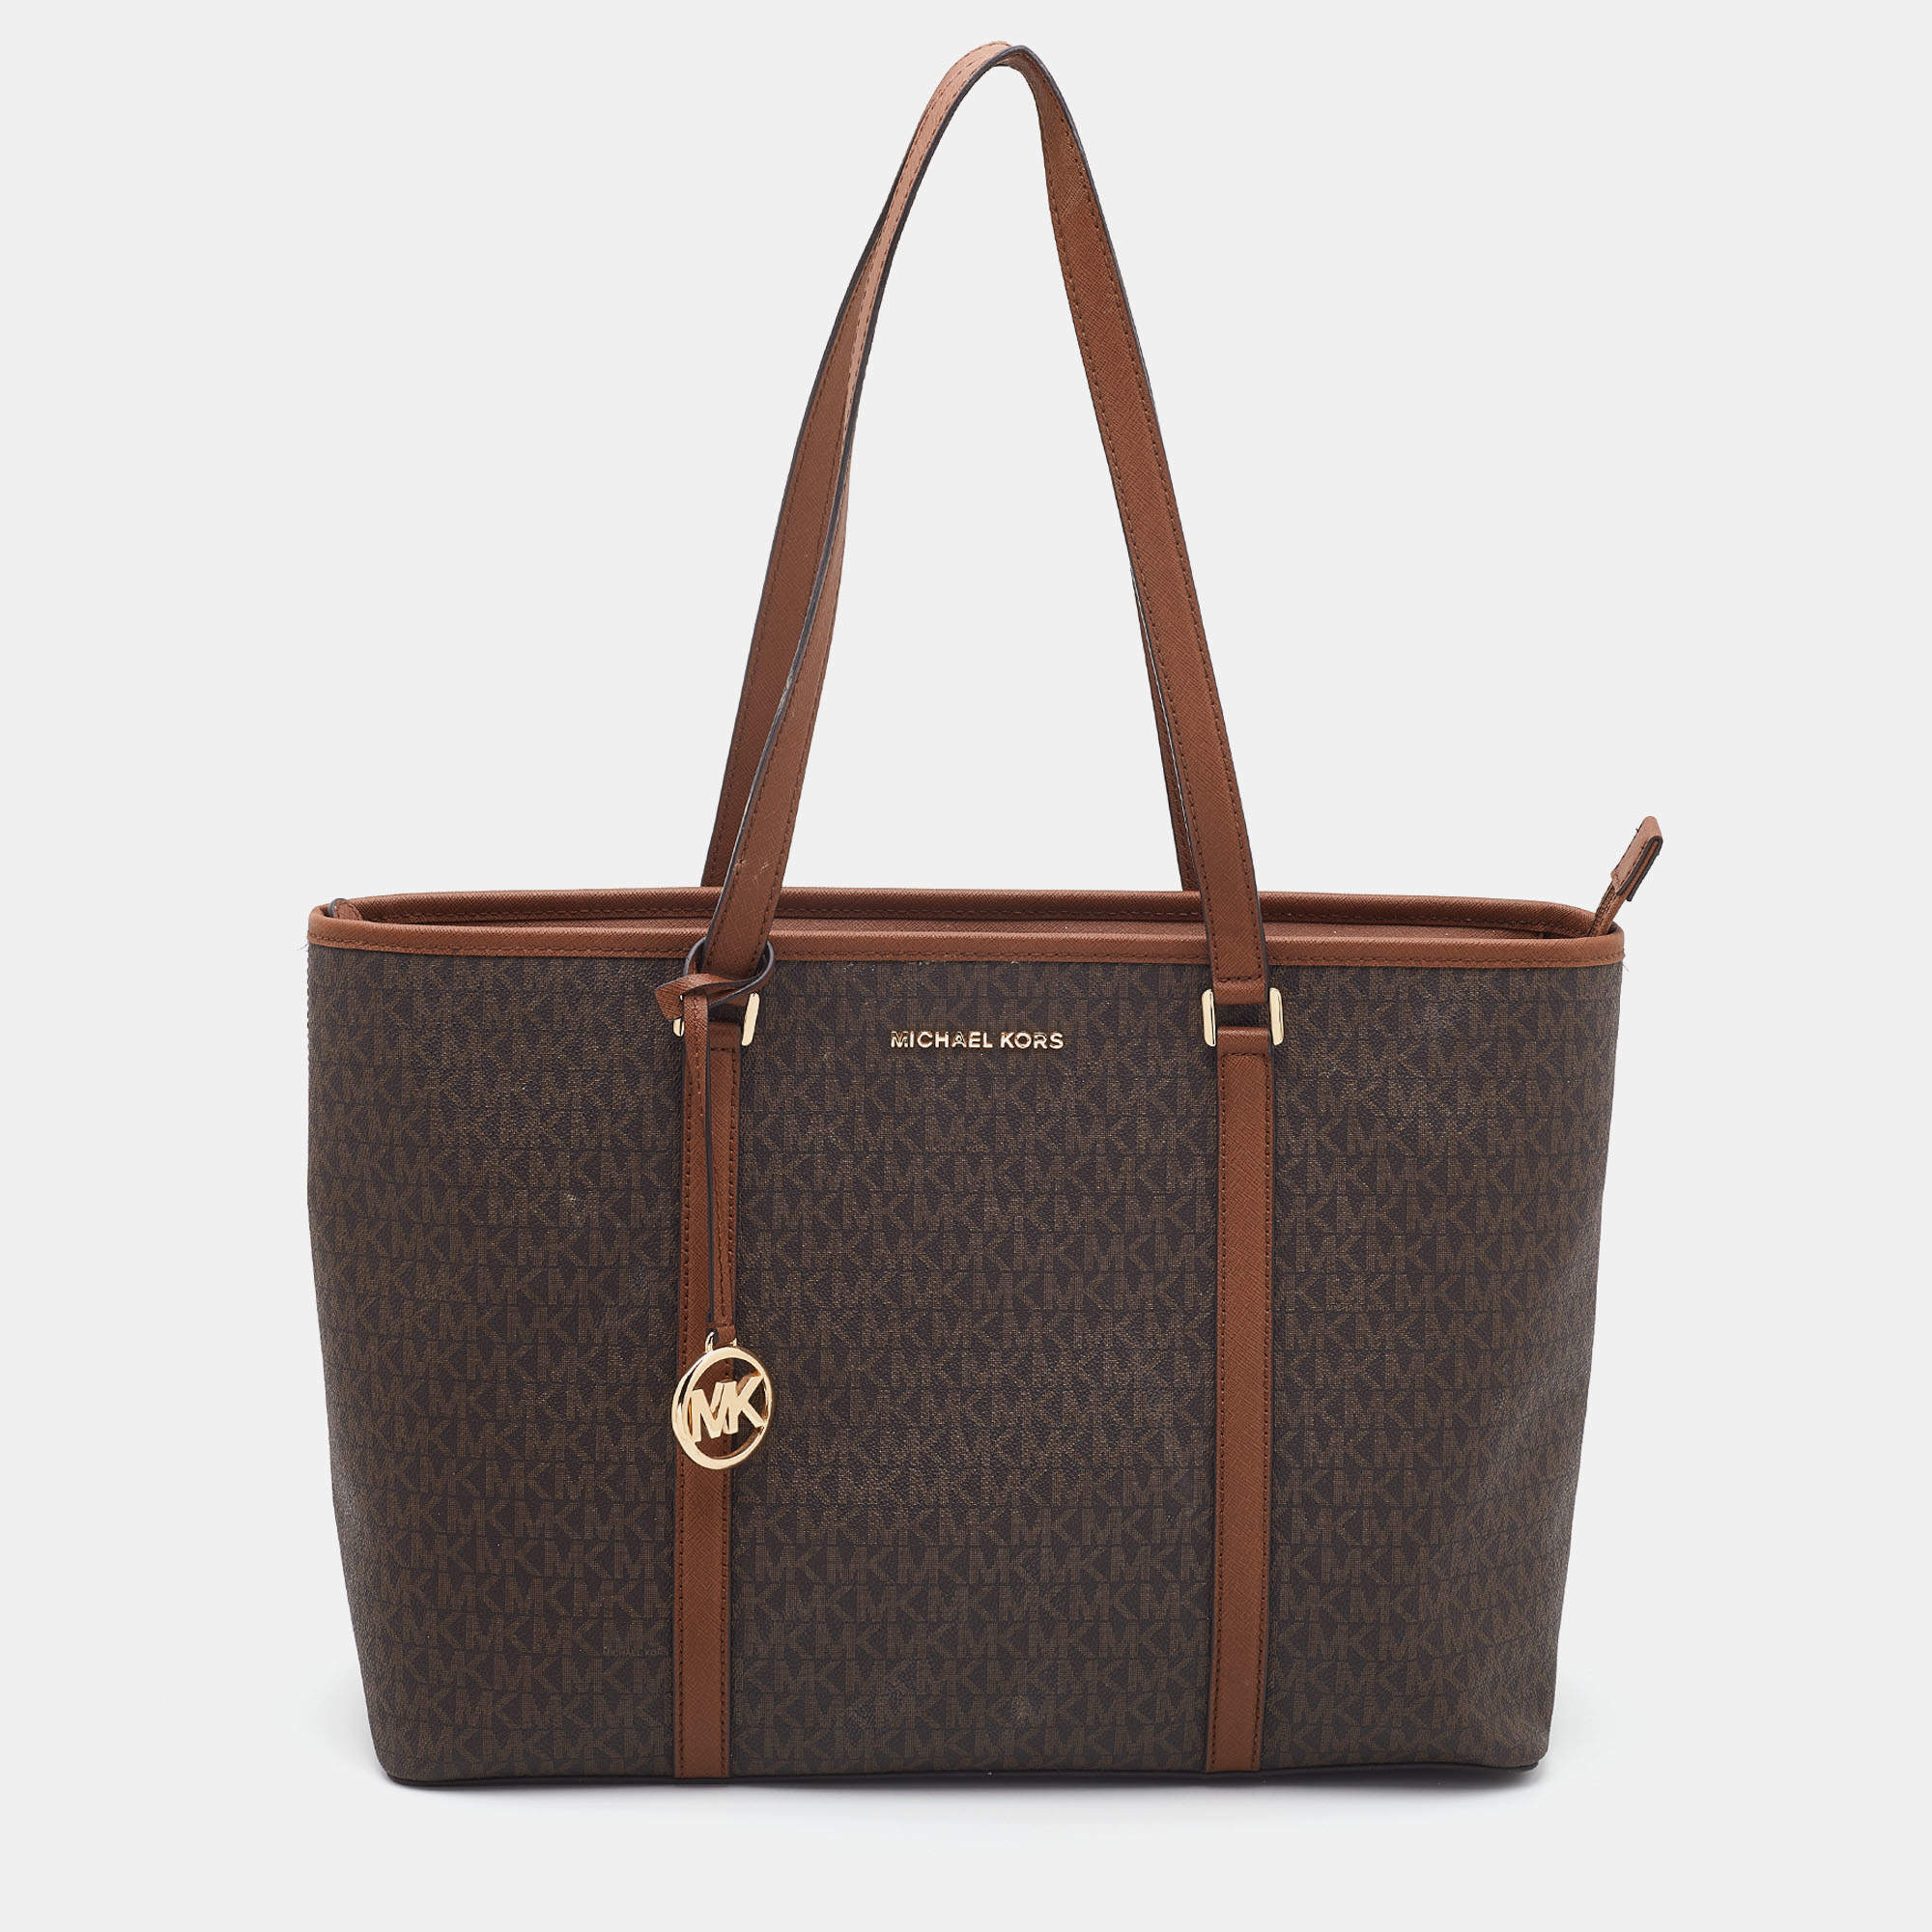 Michael Kors Sady Brown Saffiano Leather Large Tote